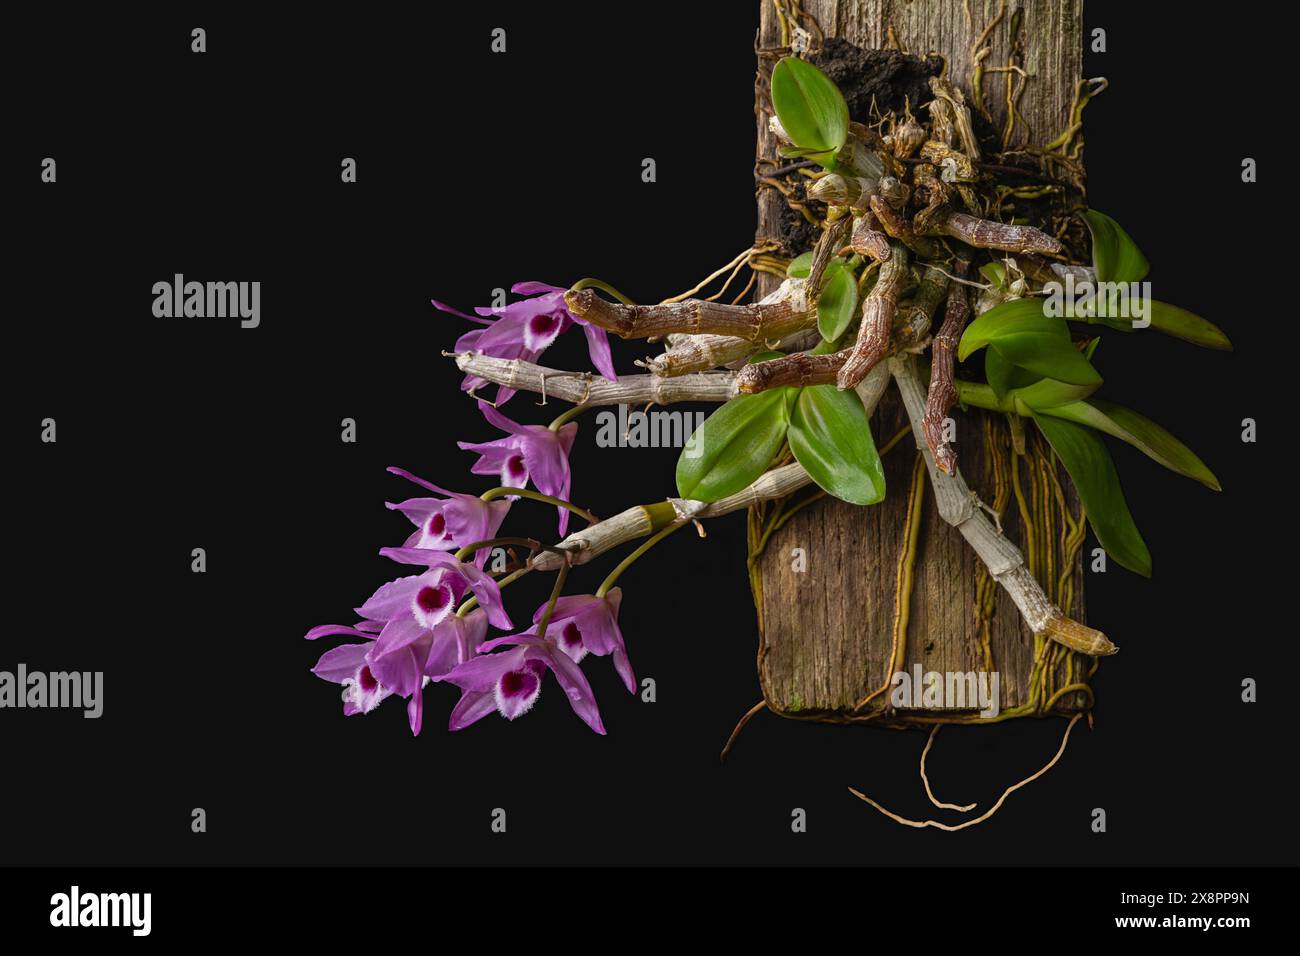 Closeup view of colorful purple and white flowers of tropical epiphytic orchid species dendrobium lituiflorum isolated on black background Stock Photo